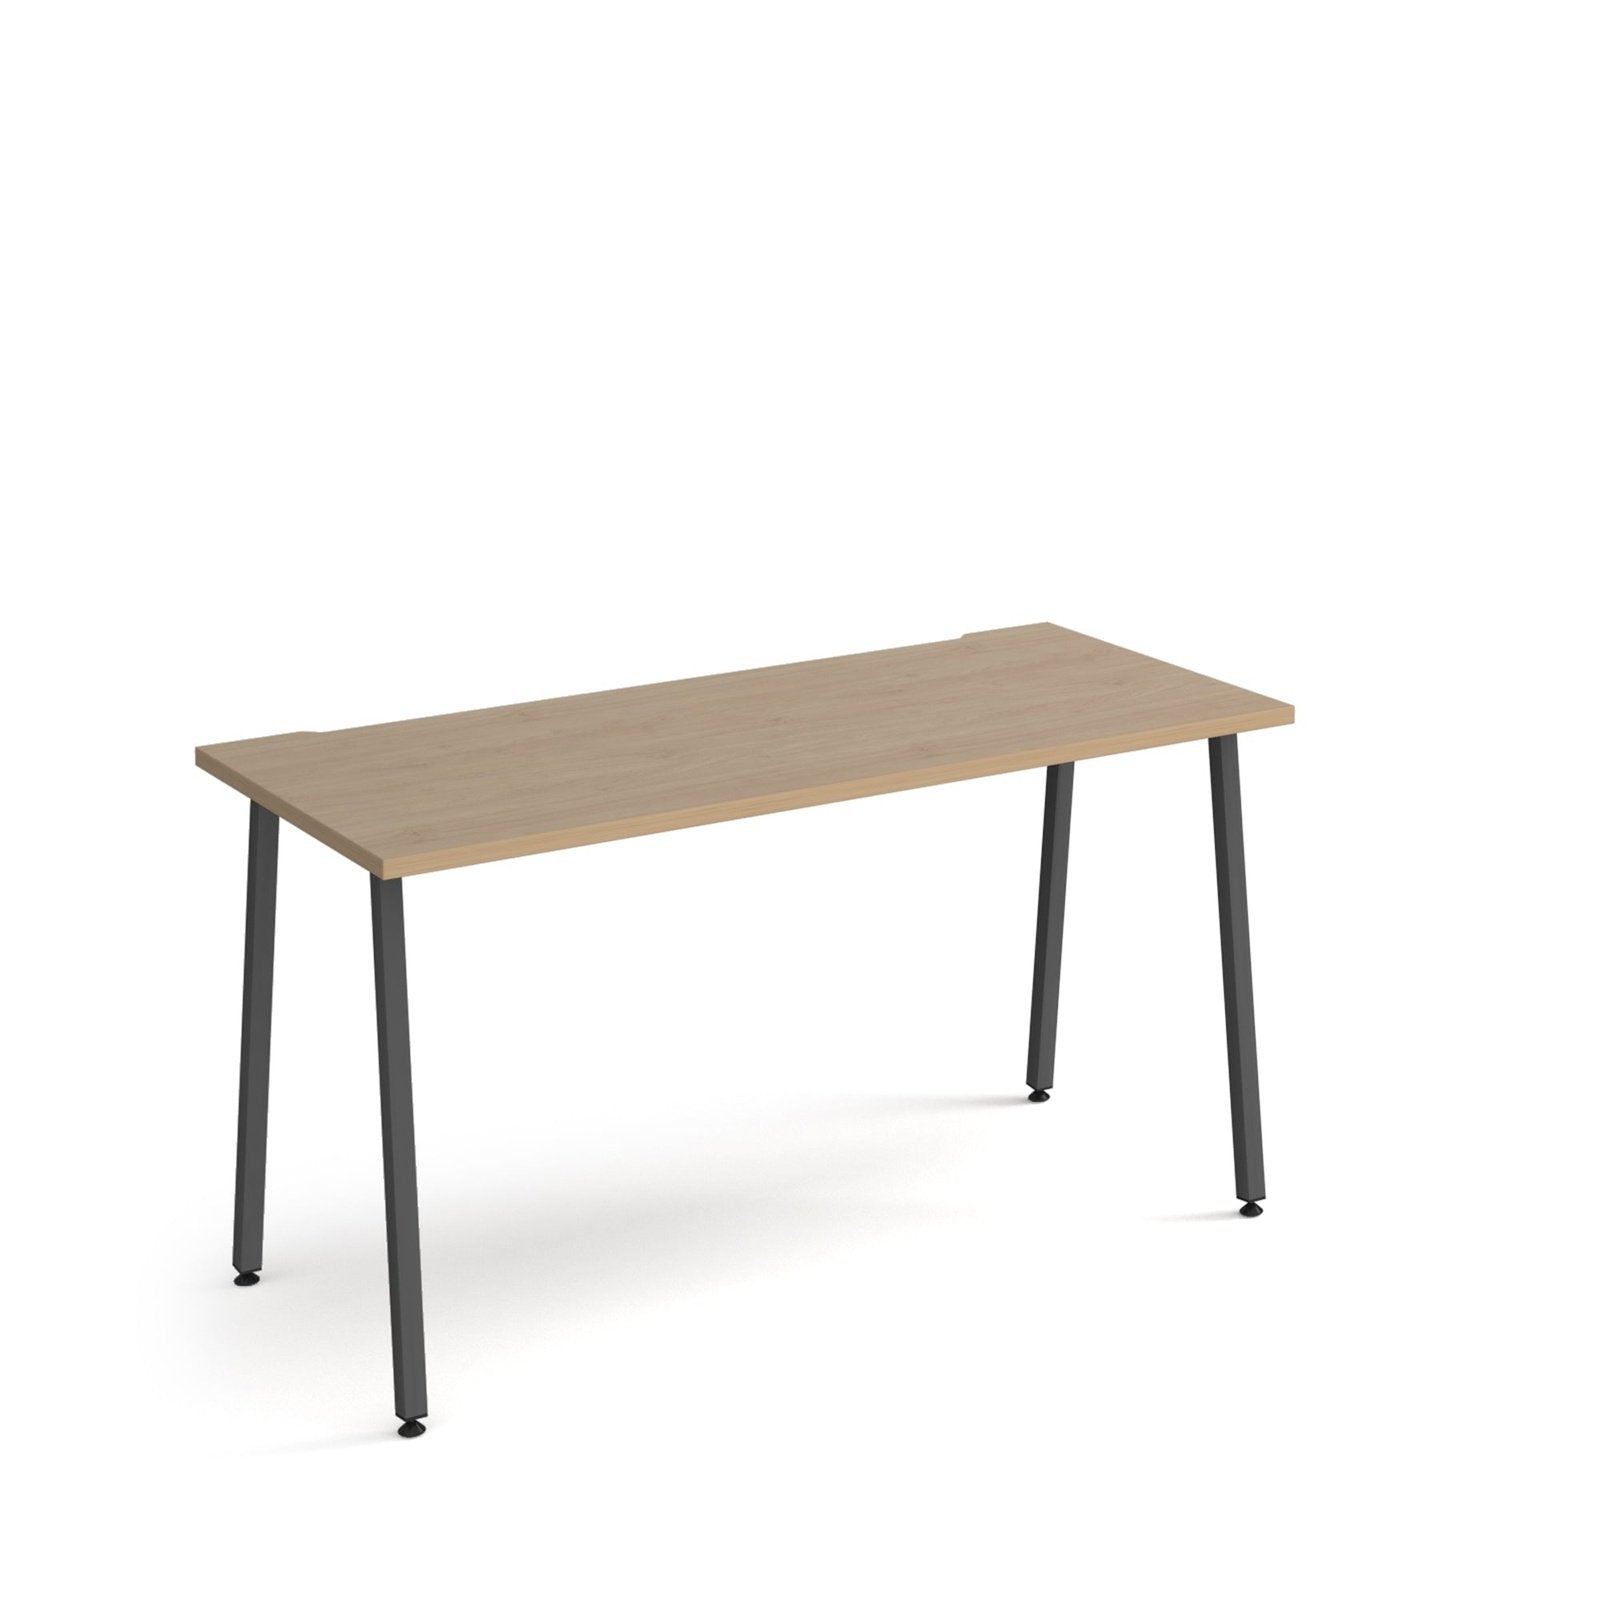 Sparta straight desk with A-frame legs - Office Products Online